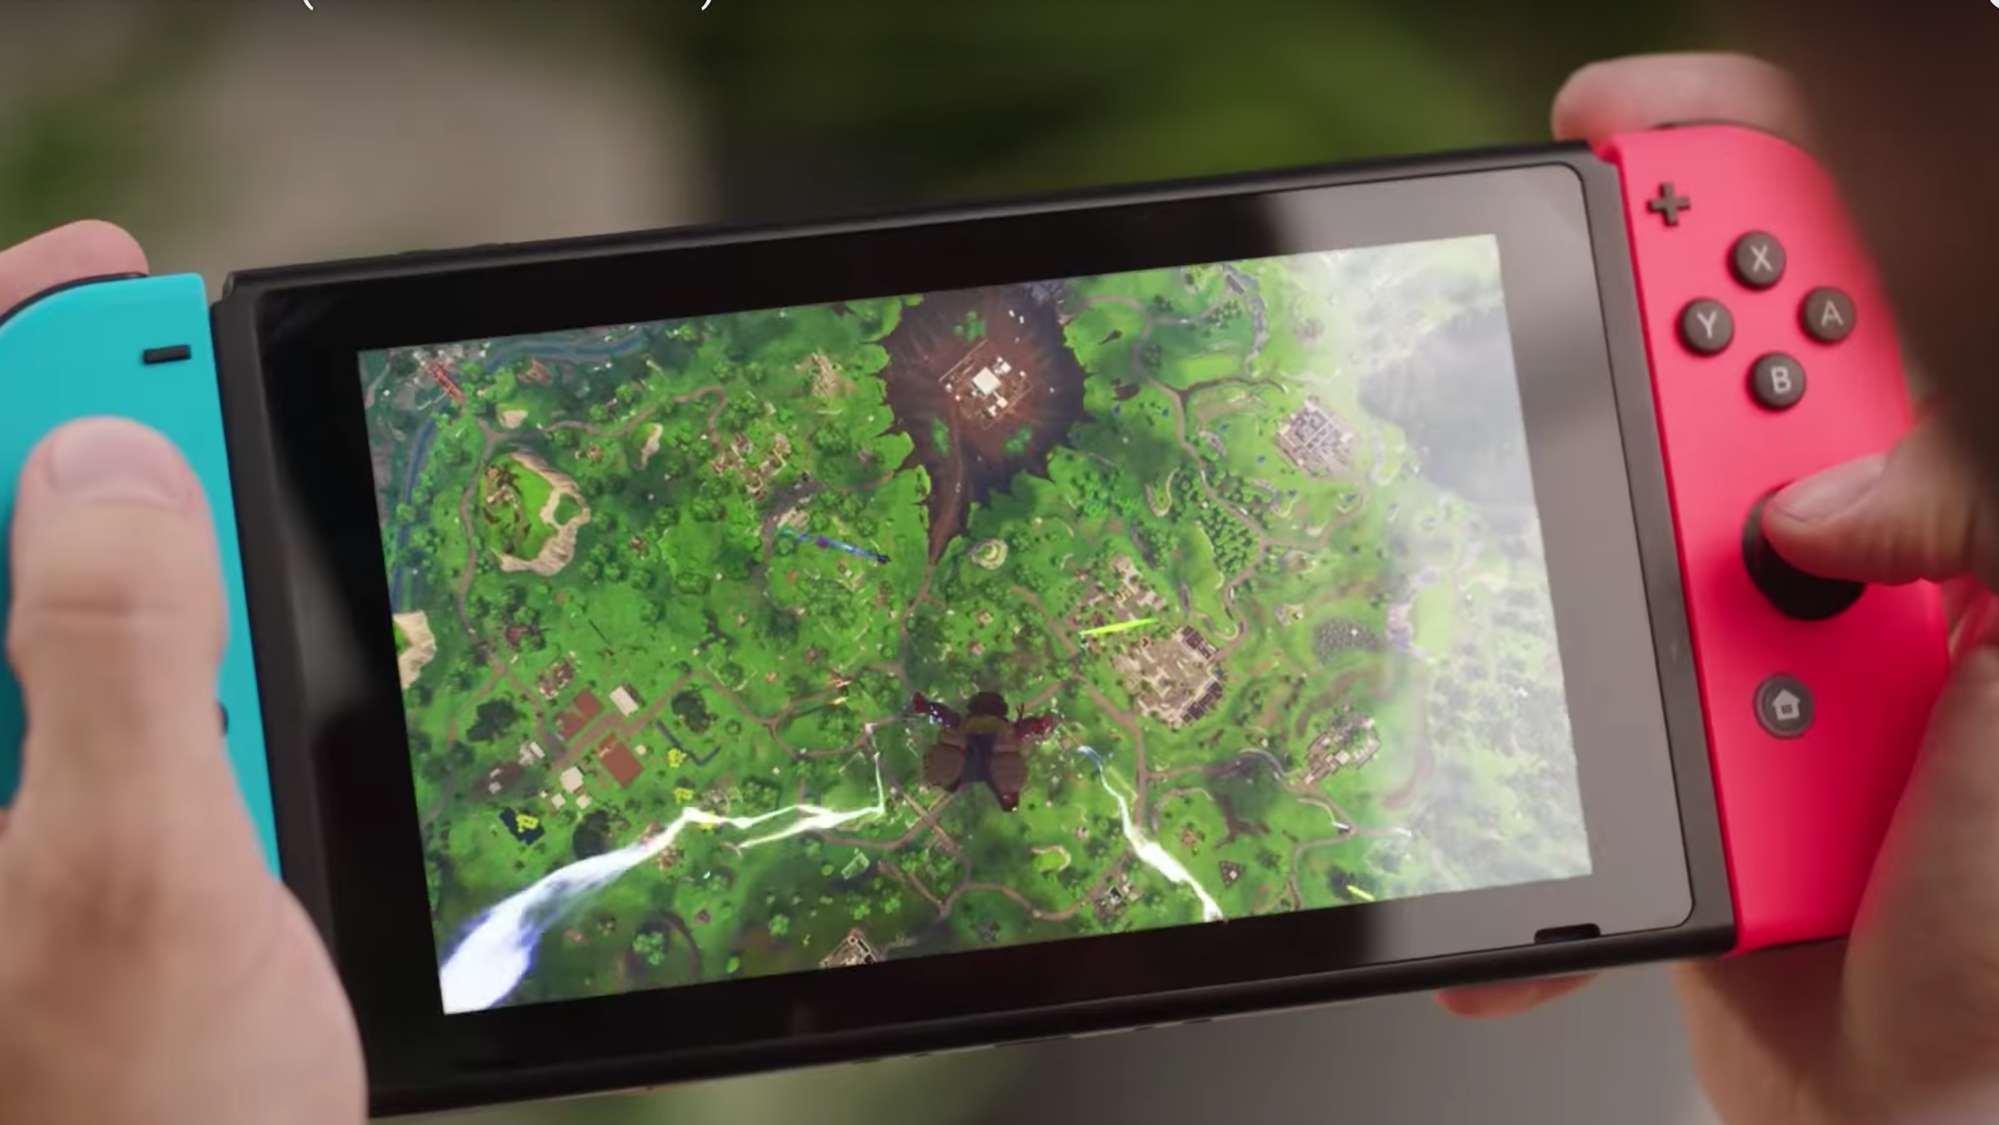 Fortnite for the Switch was downloaded 2 million times in under 24 hours -  The Verge